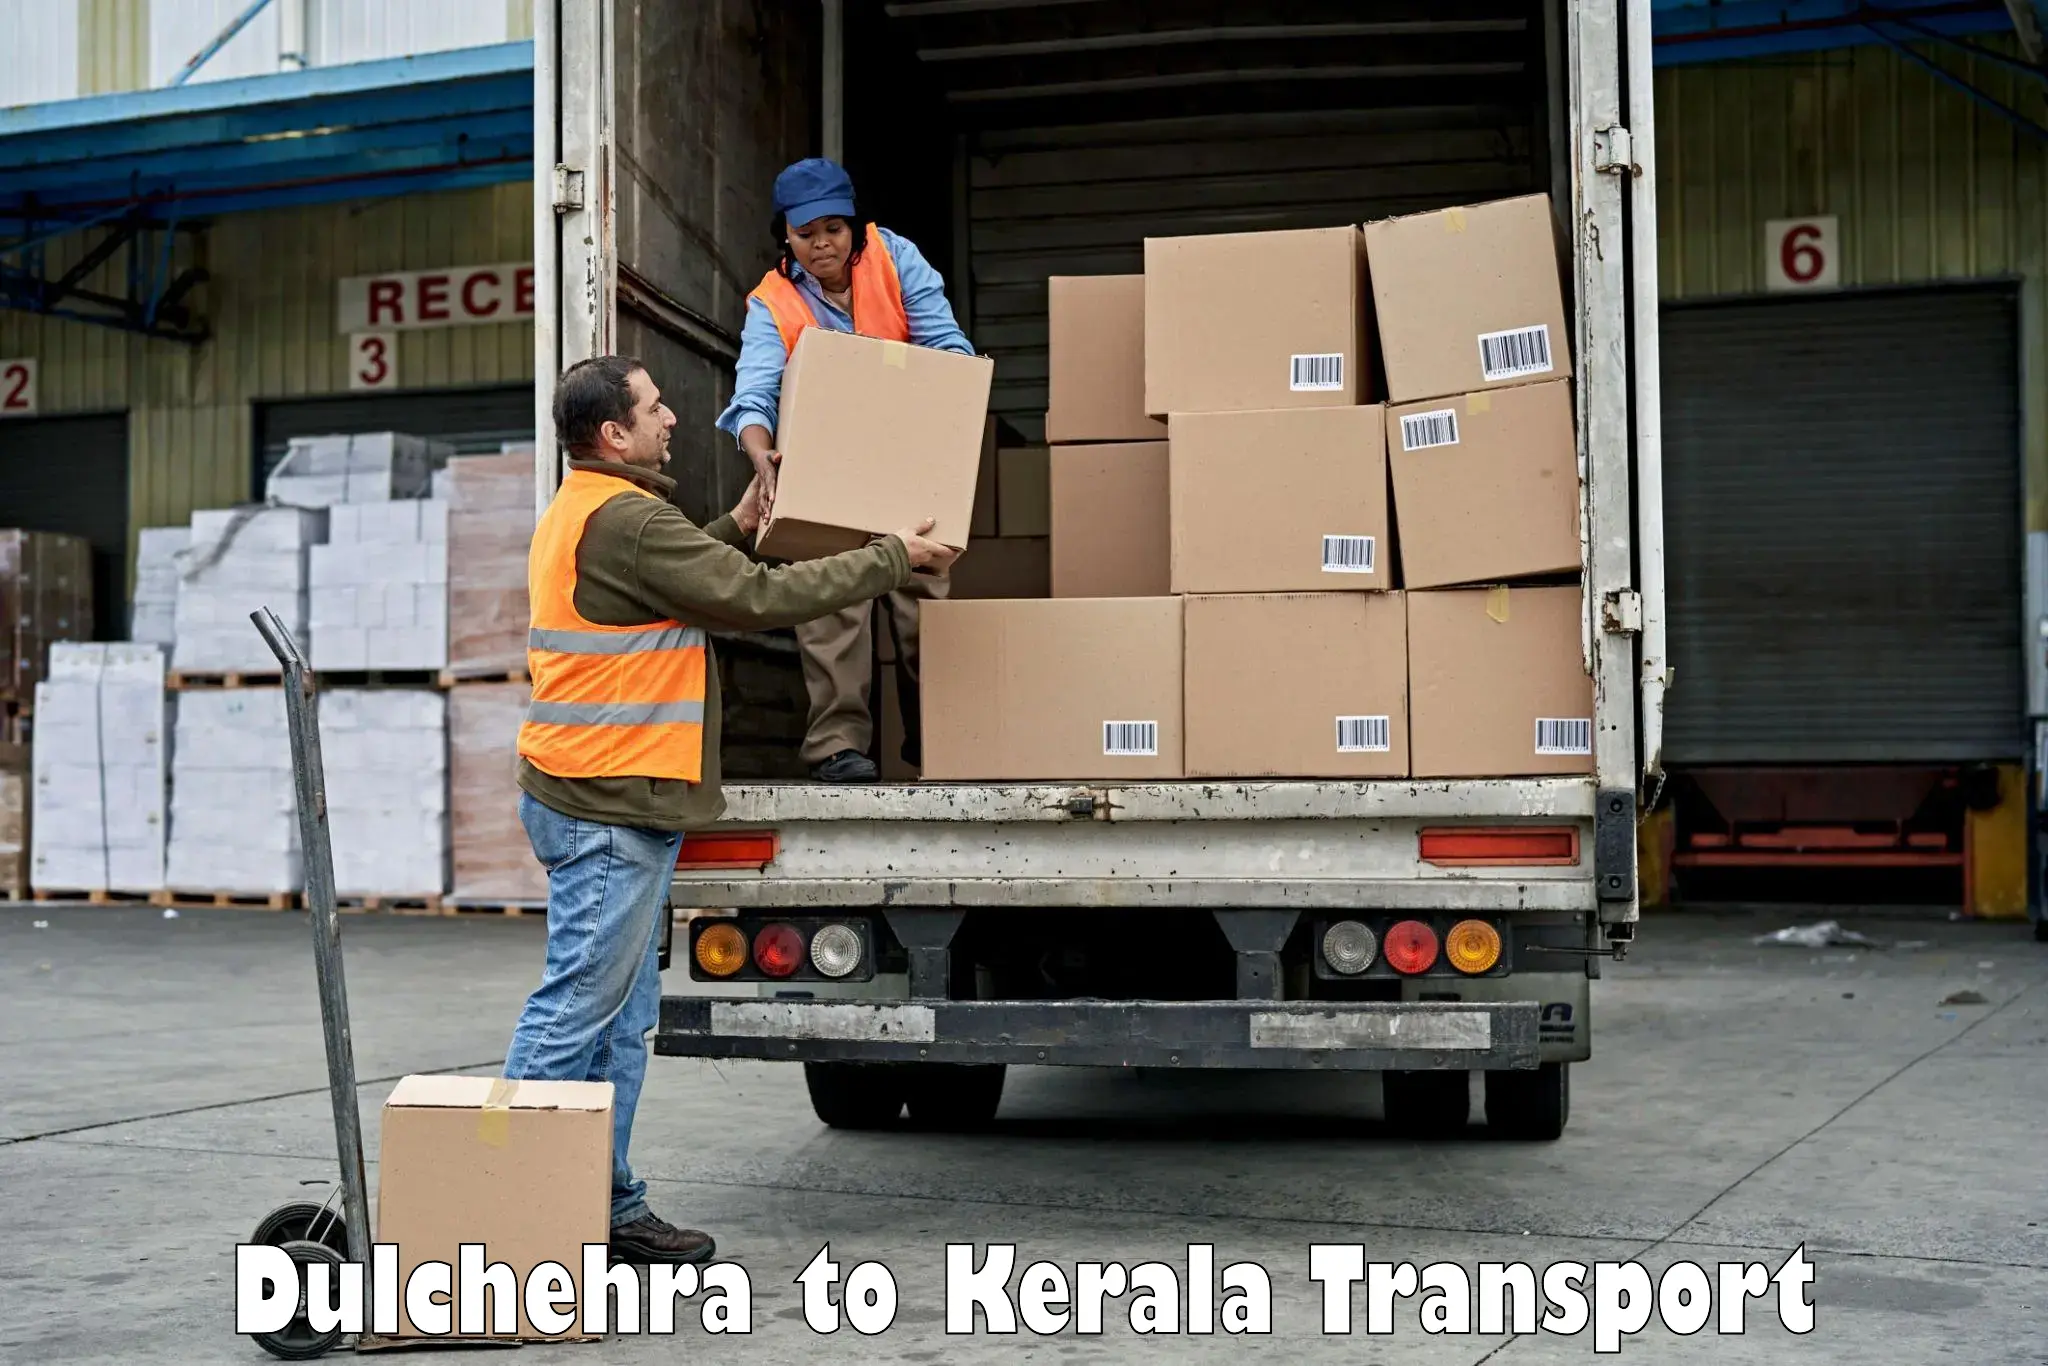 Daily parcel service transport in Dulchehra to Rajamudy